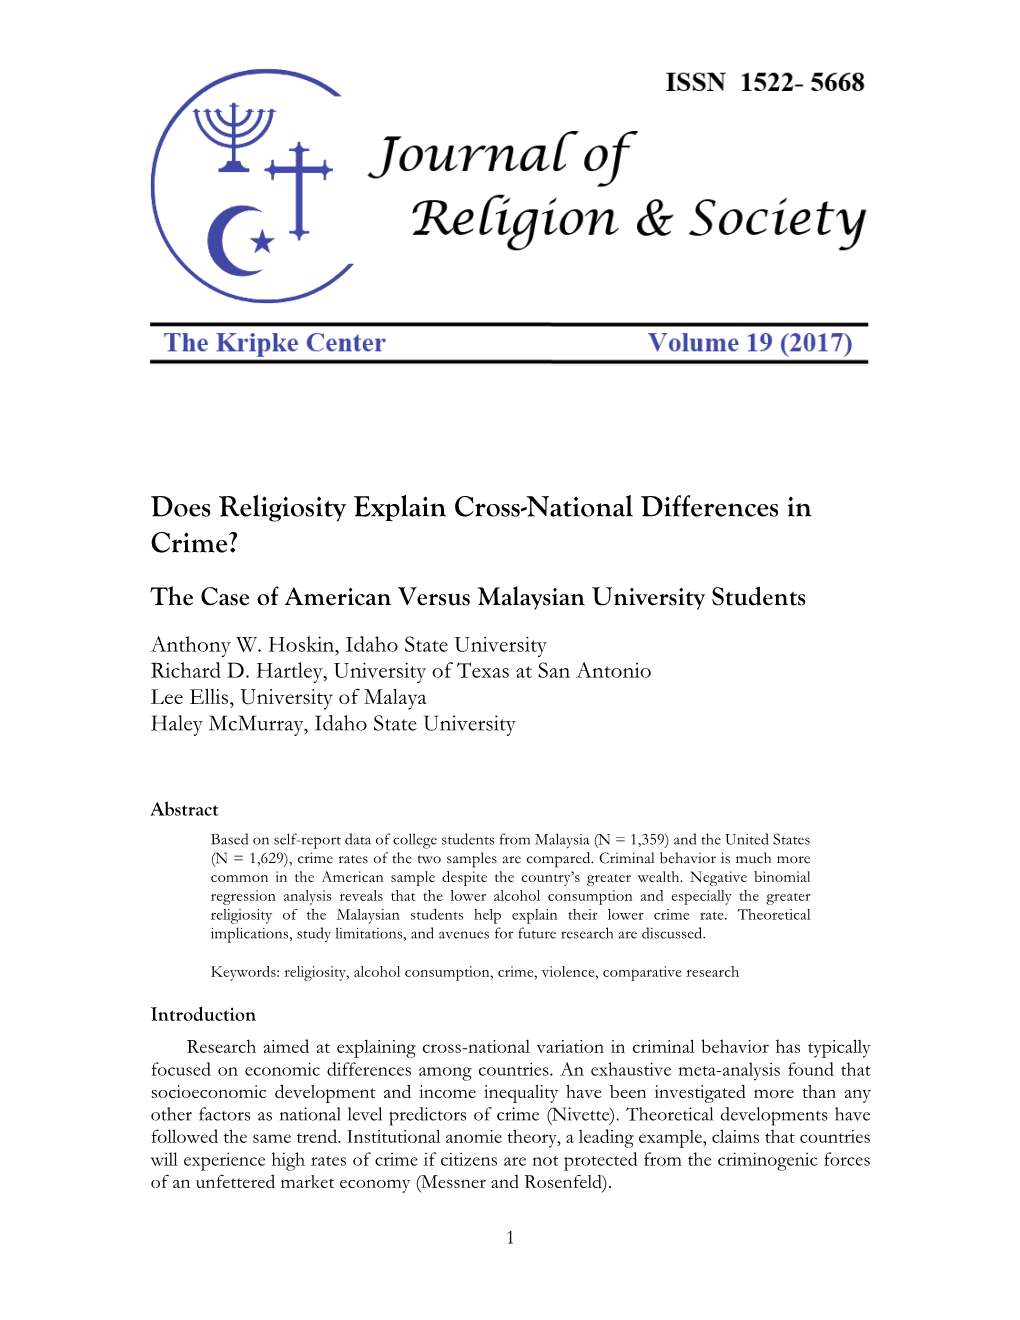 Does Religiosity Explain Cross-National Differences in Crime? the Case of American Versus Malaysian University Students Anthony W